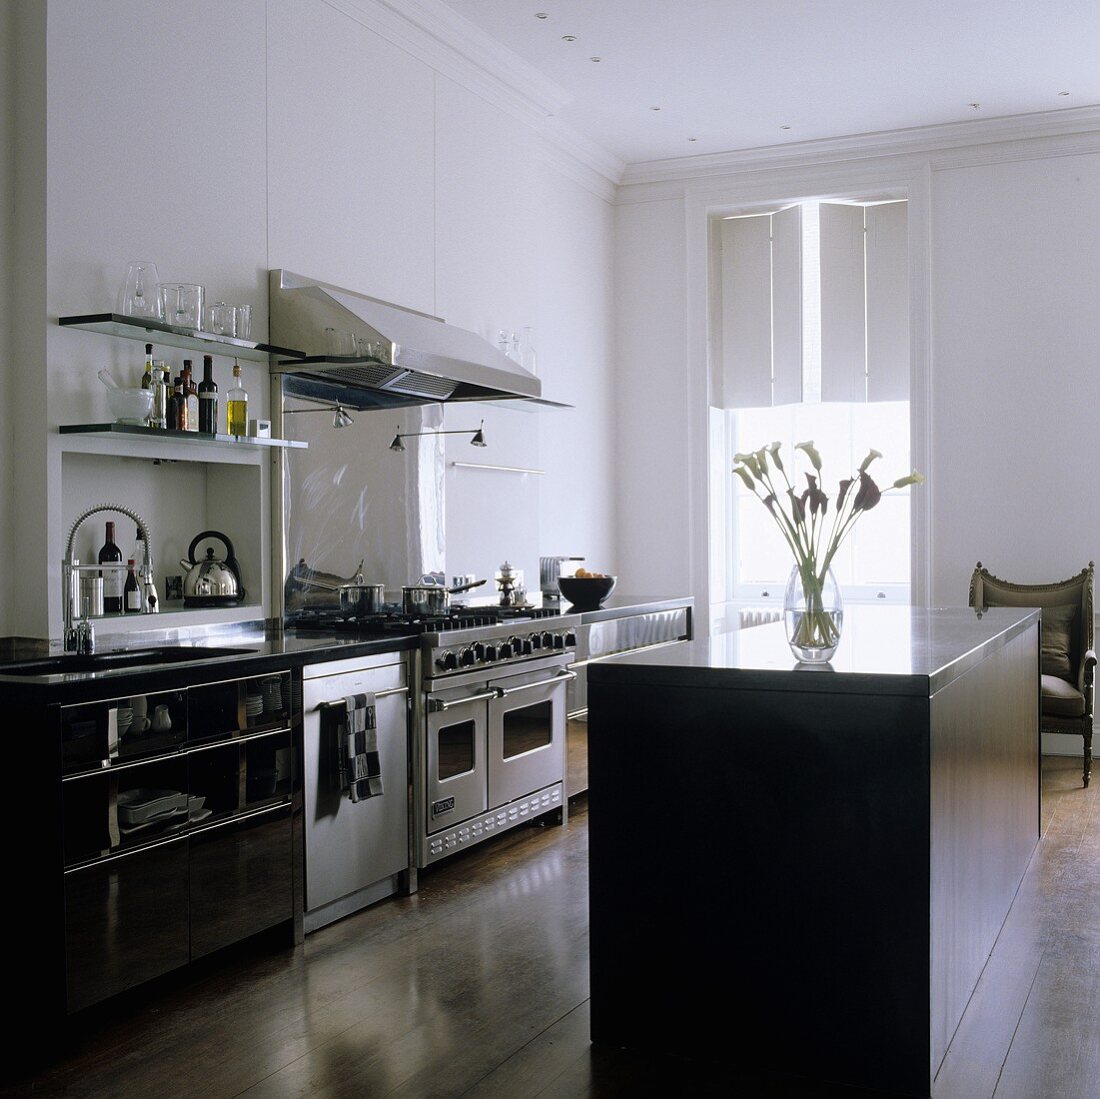 An open-plan kitchen in a period building with a free-standing kitchen counter